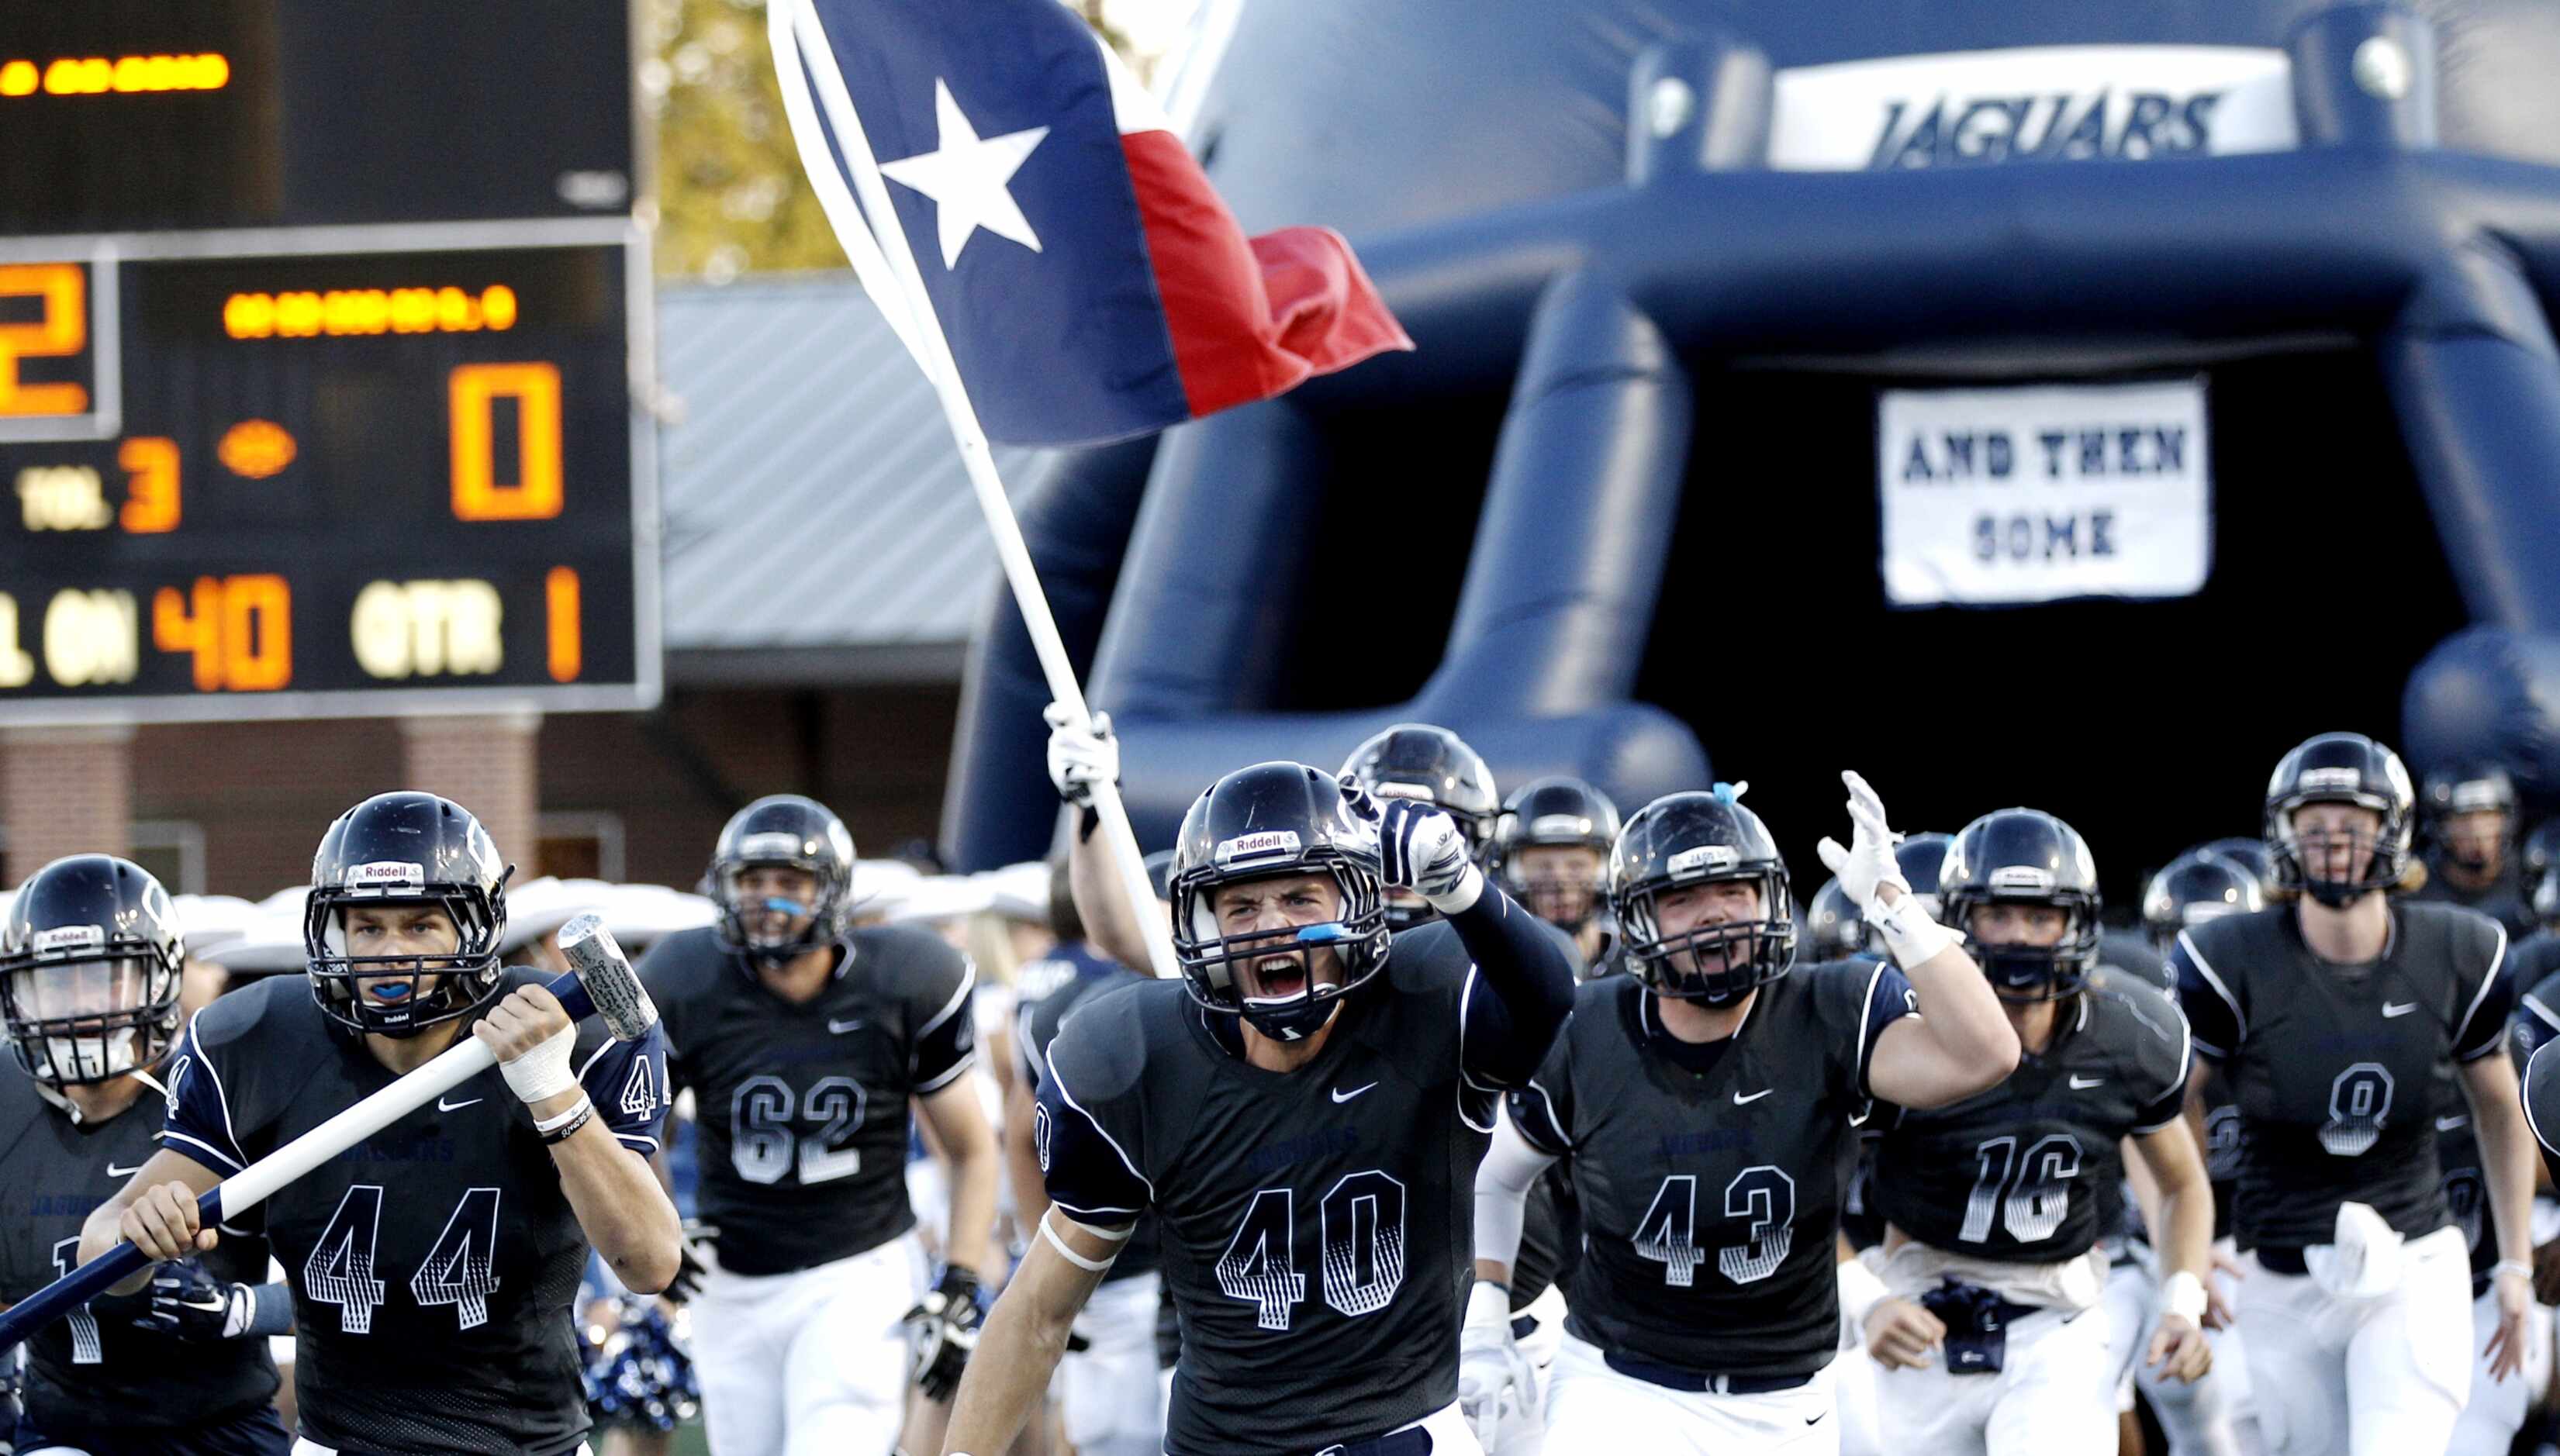 Flower Mounds varsity team takes the field before a high school football game against Keller...